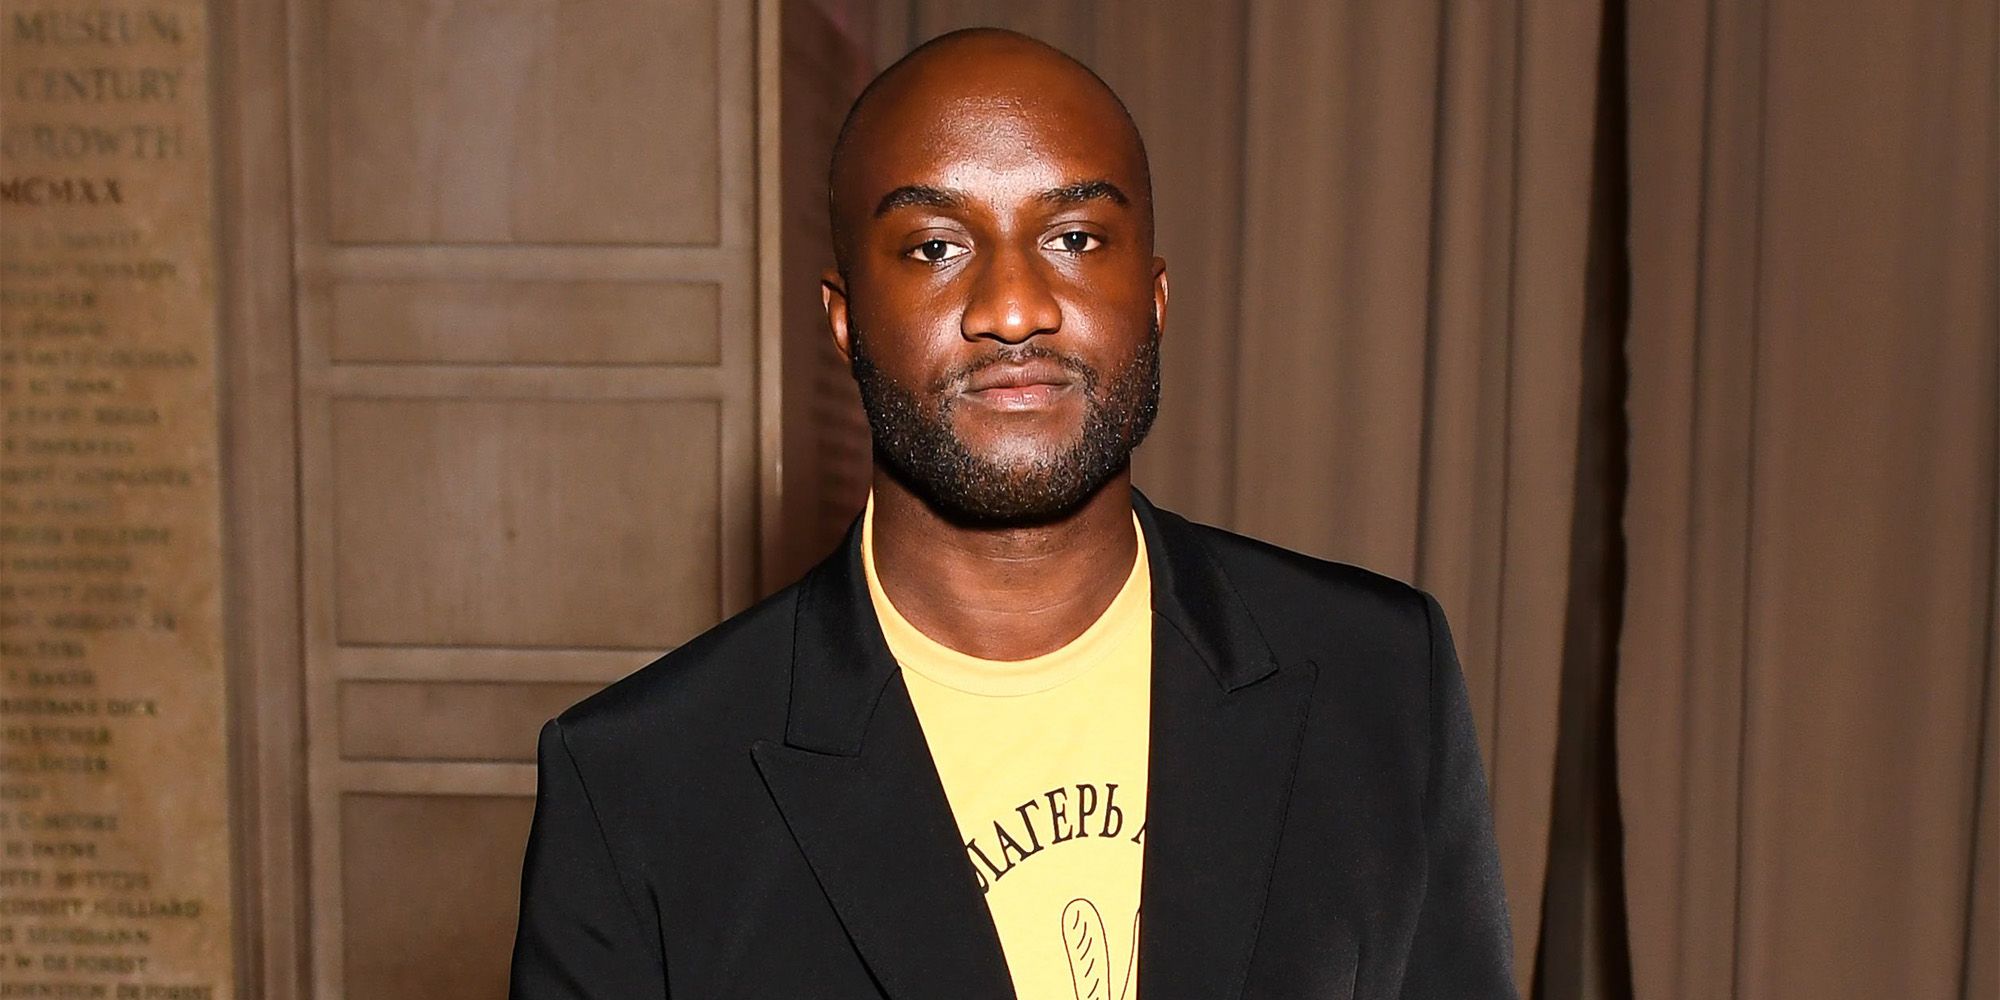 Where to buy Moet & Chandon Nectar Imperial Rose Limited Edition by Virgil  Abloh, Champagne, France